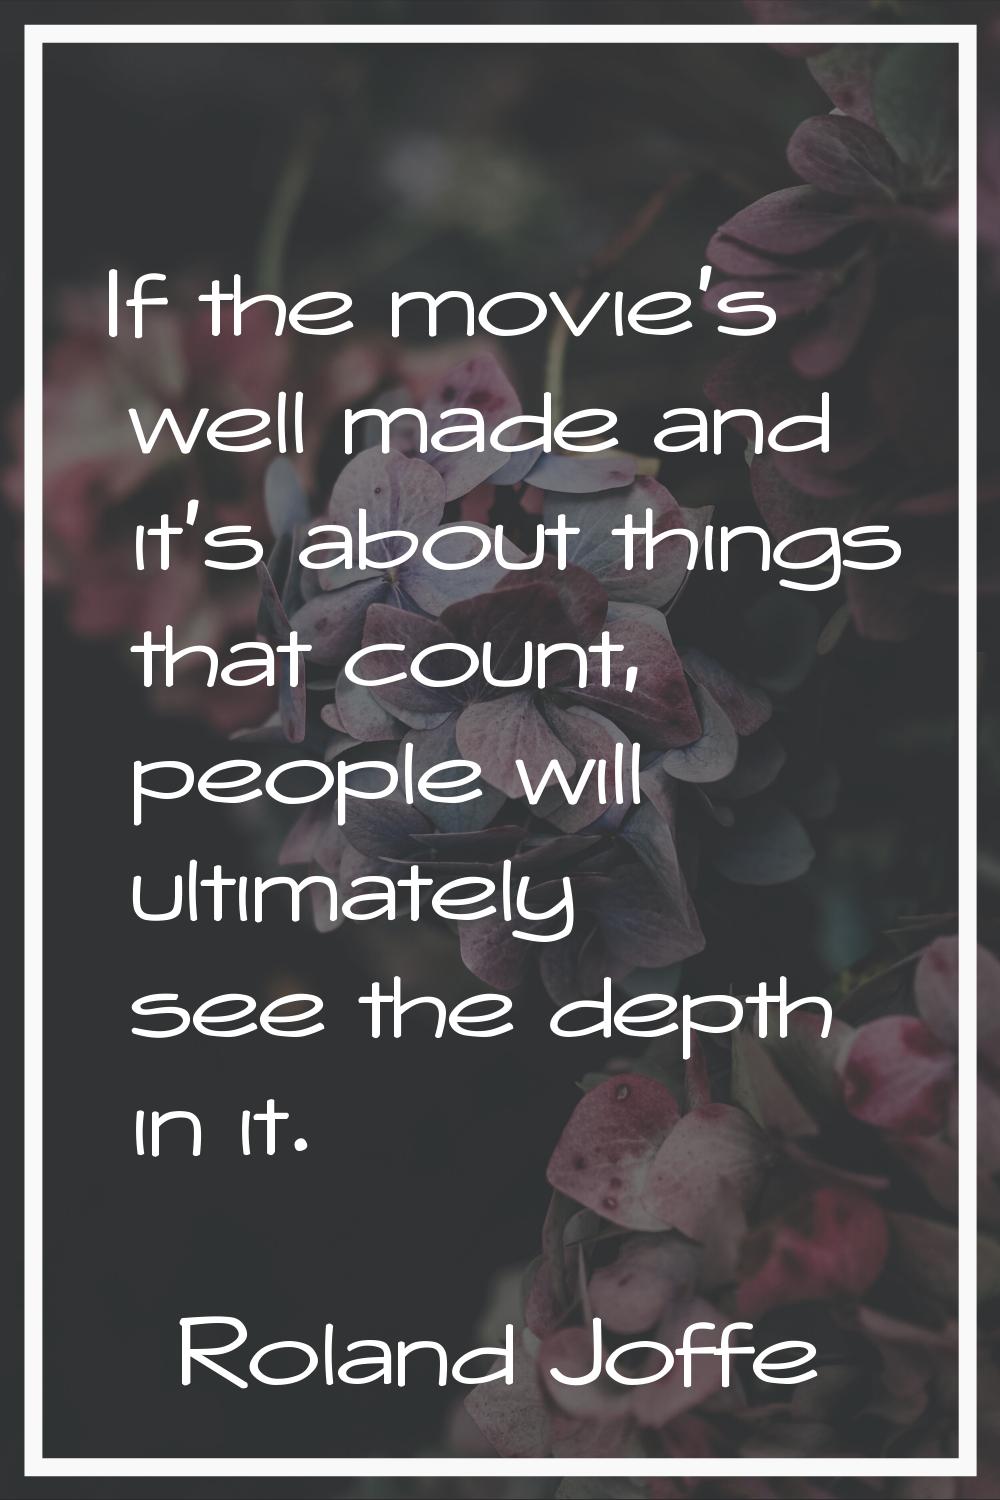 If the movie's well made and it's about things that count, people will ultimately see the depth in 